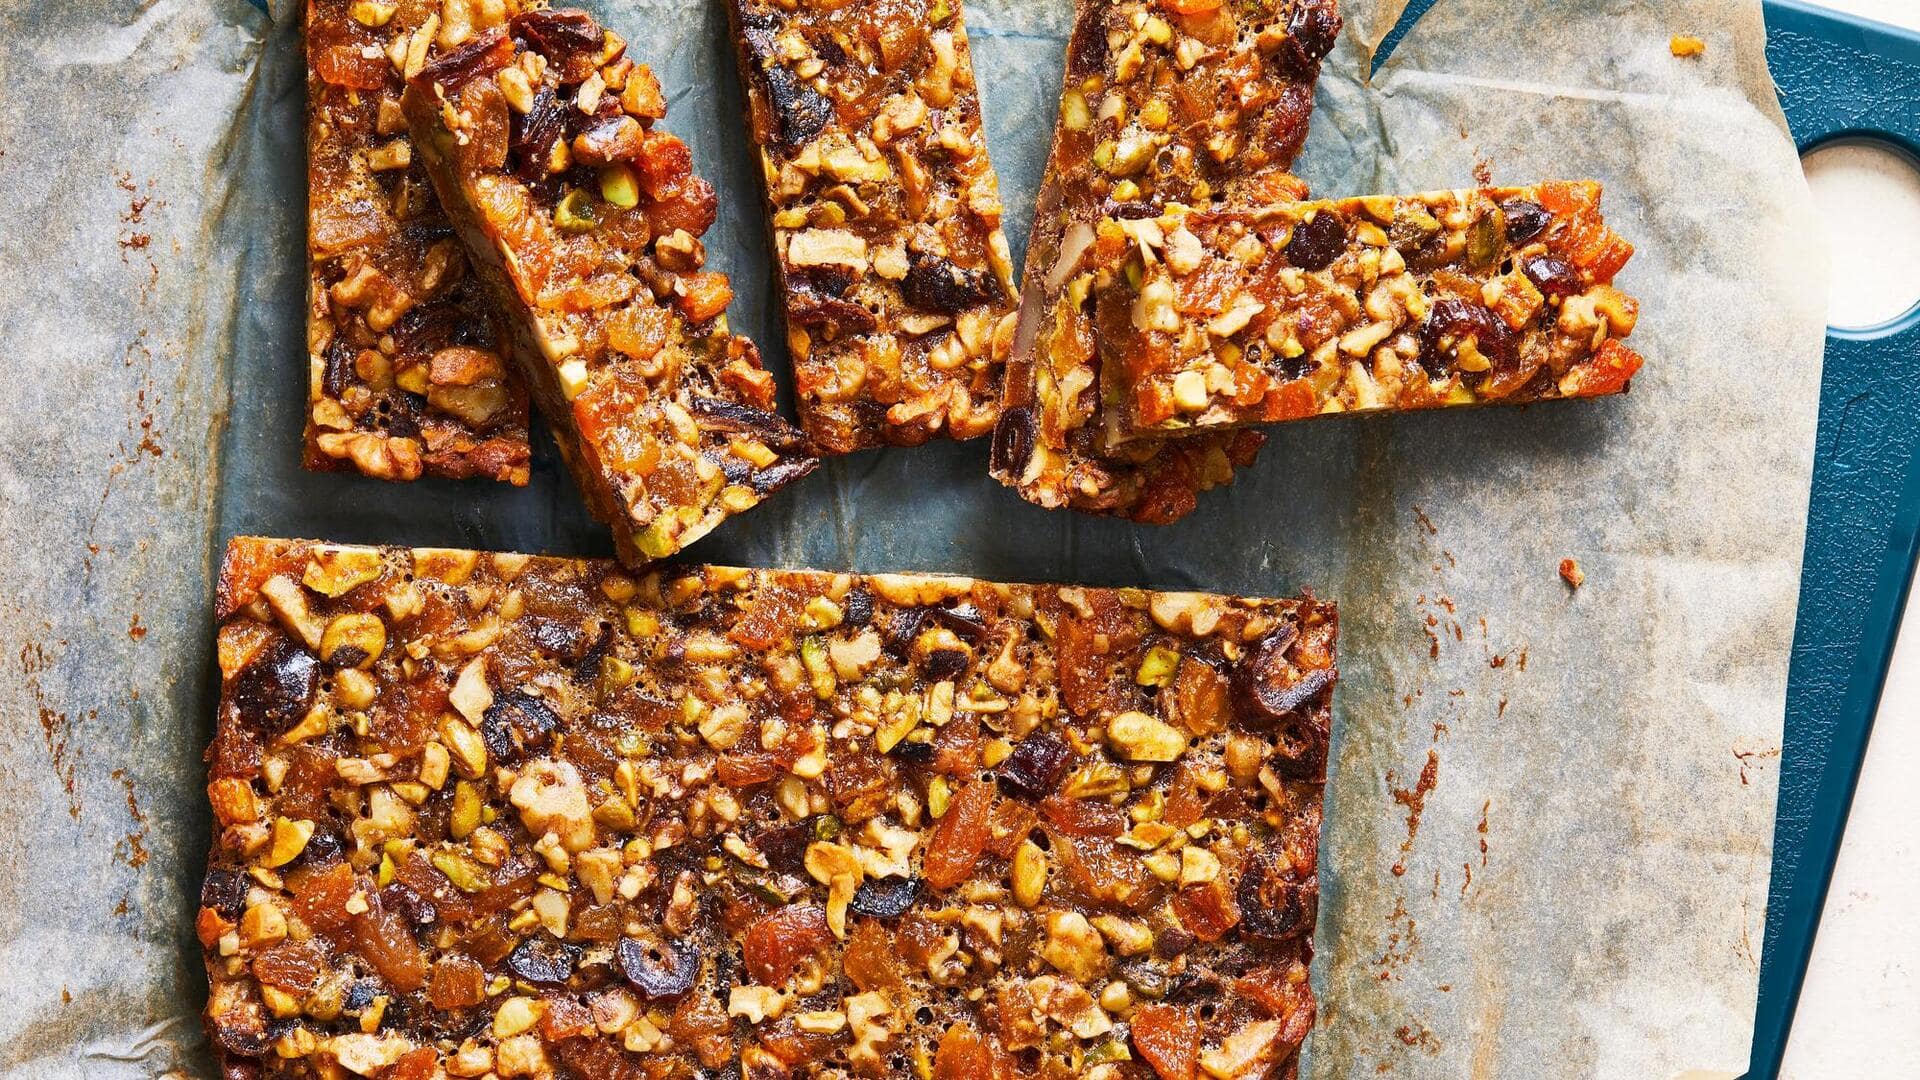 Add these spirulina-infused energy bars to your daily diet